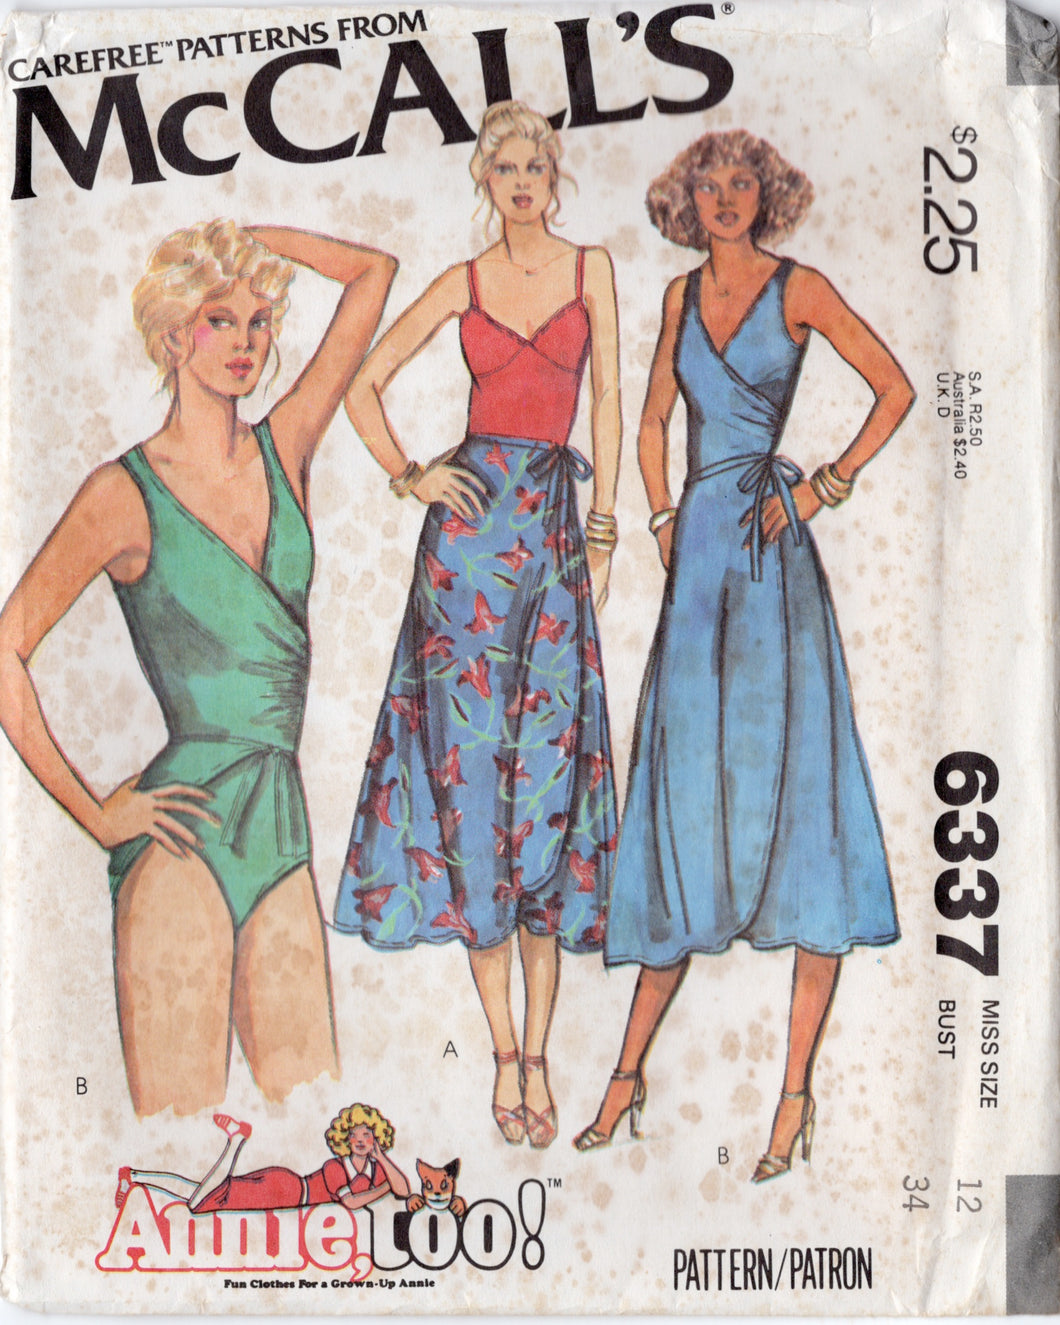 1970's McCall's Wrap Bodysuit and Wrap Skirt Cover up pattern - Bust 34